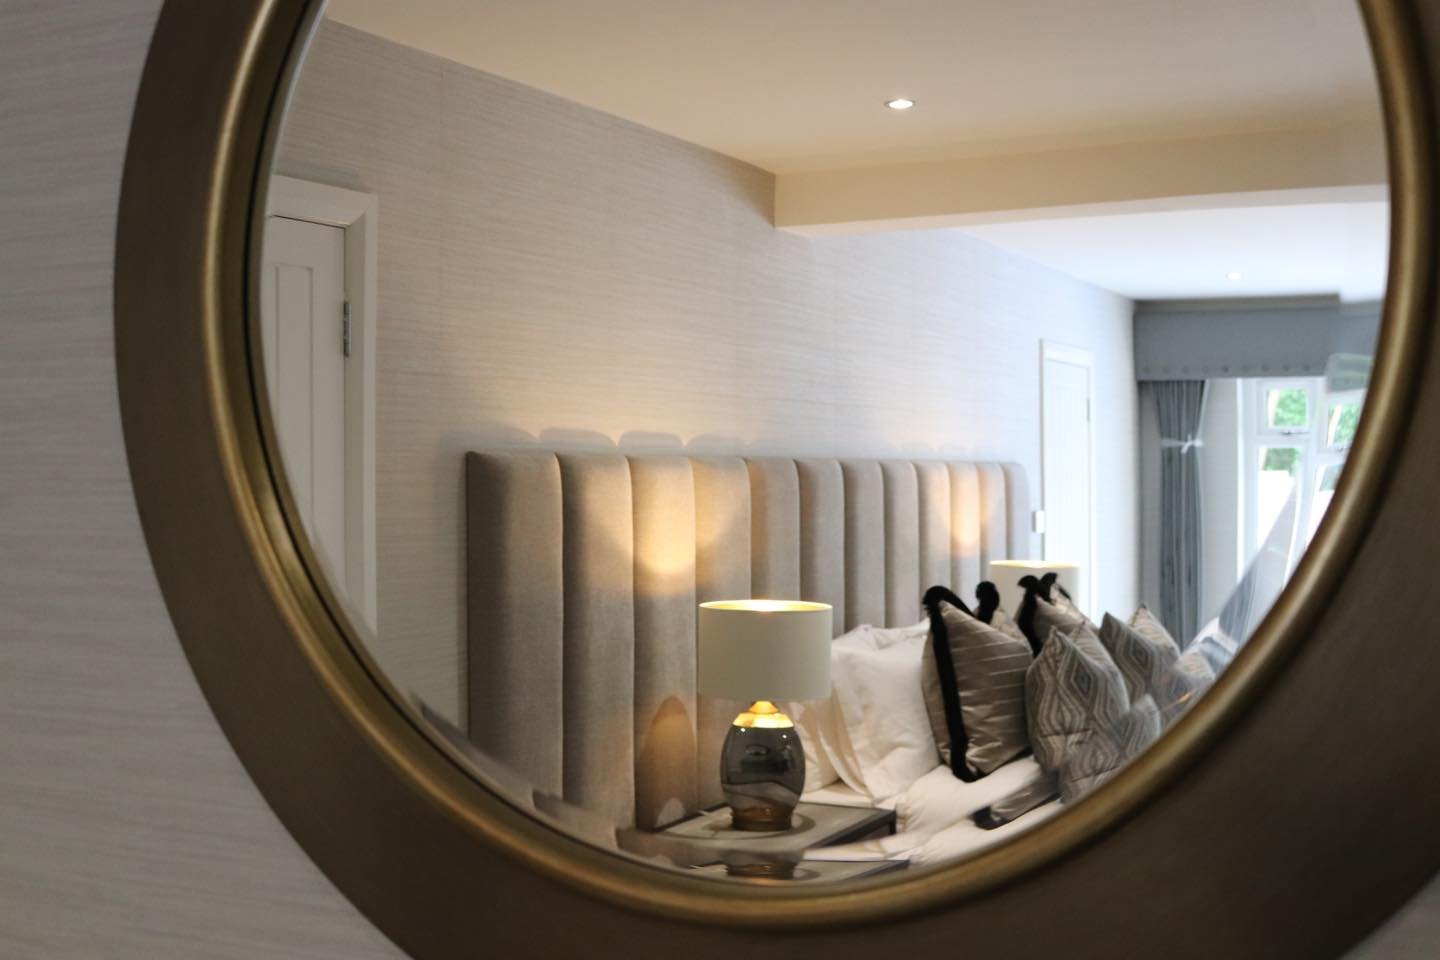 Beautifully elegant master bedroom 🤍

We have a variety of design packages to choose from. Message or give us a call for more info if you&rsquo;re thinking of giving your home a re-vamp this summer.

#luxuryhomes #interiordesigntrends #bespokedesign